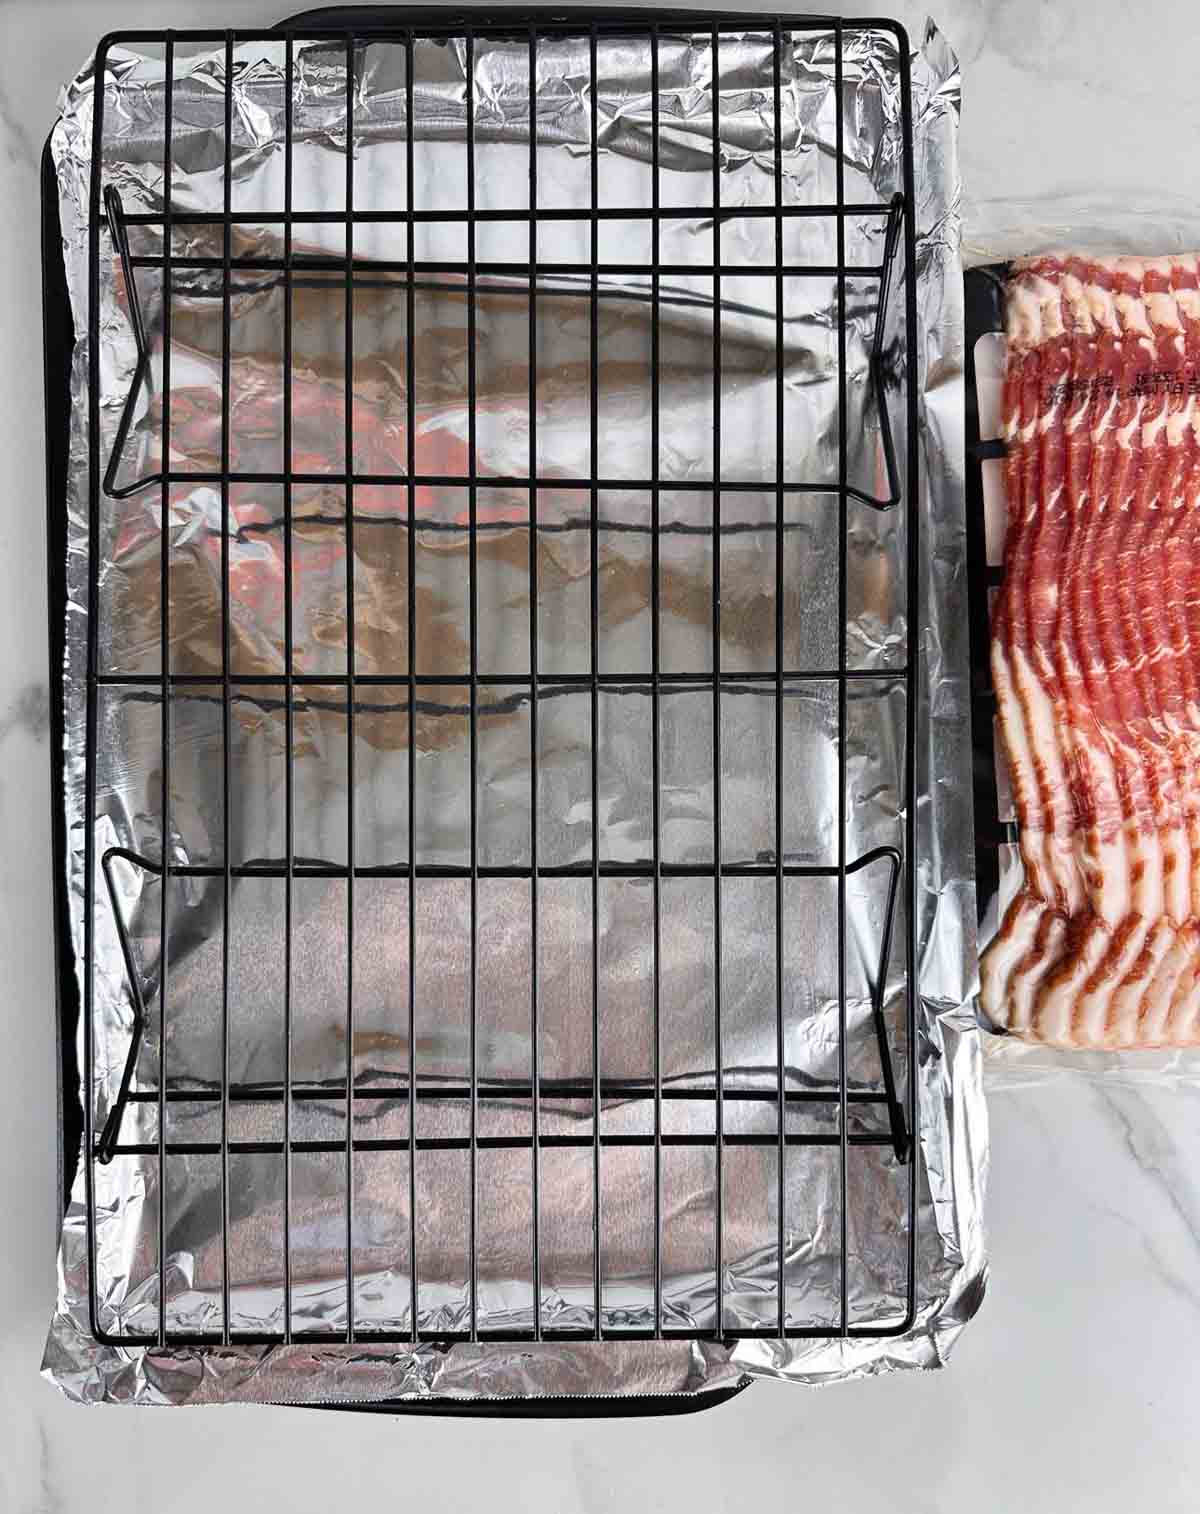 To make bacon in a convection oven you just need bacon and a cookie sheet lined with foil underneath a wire cooking rack